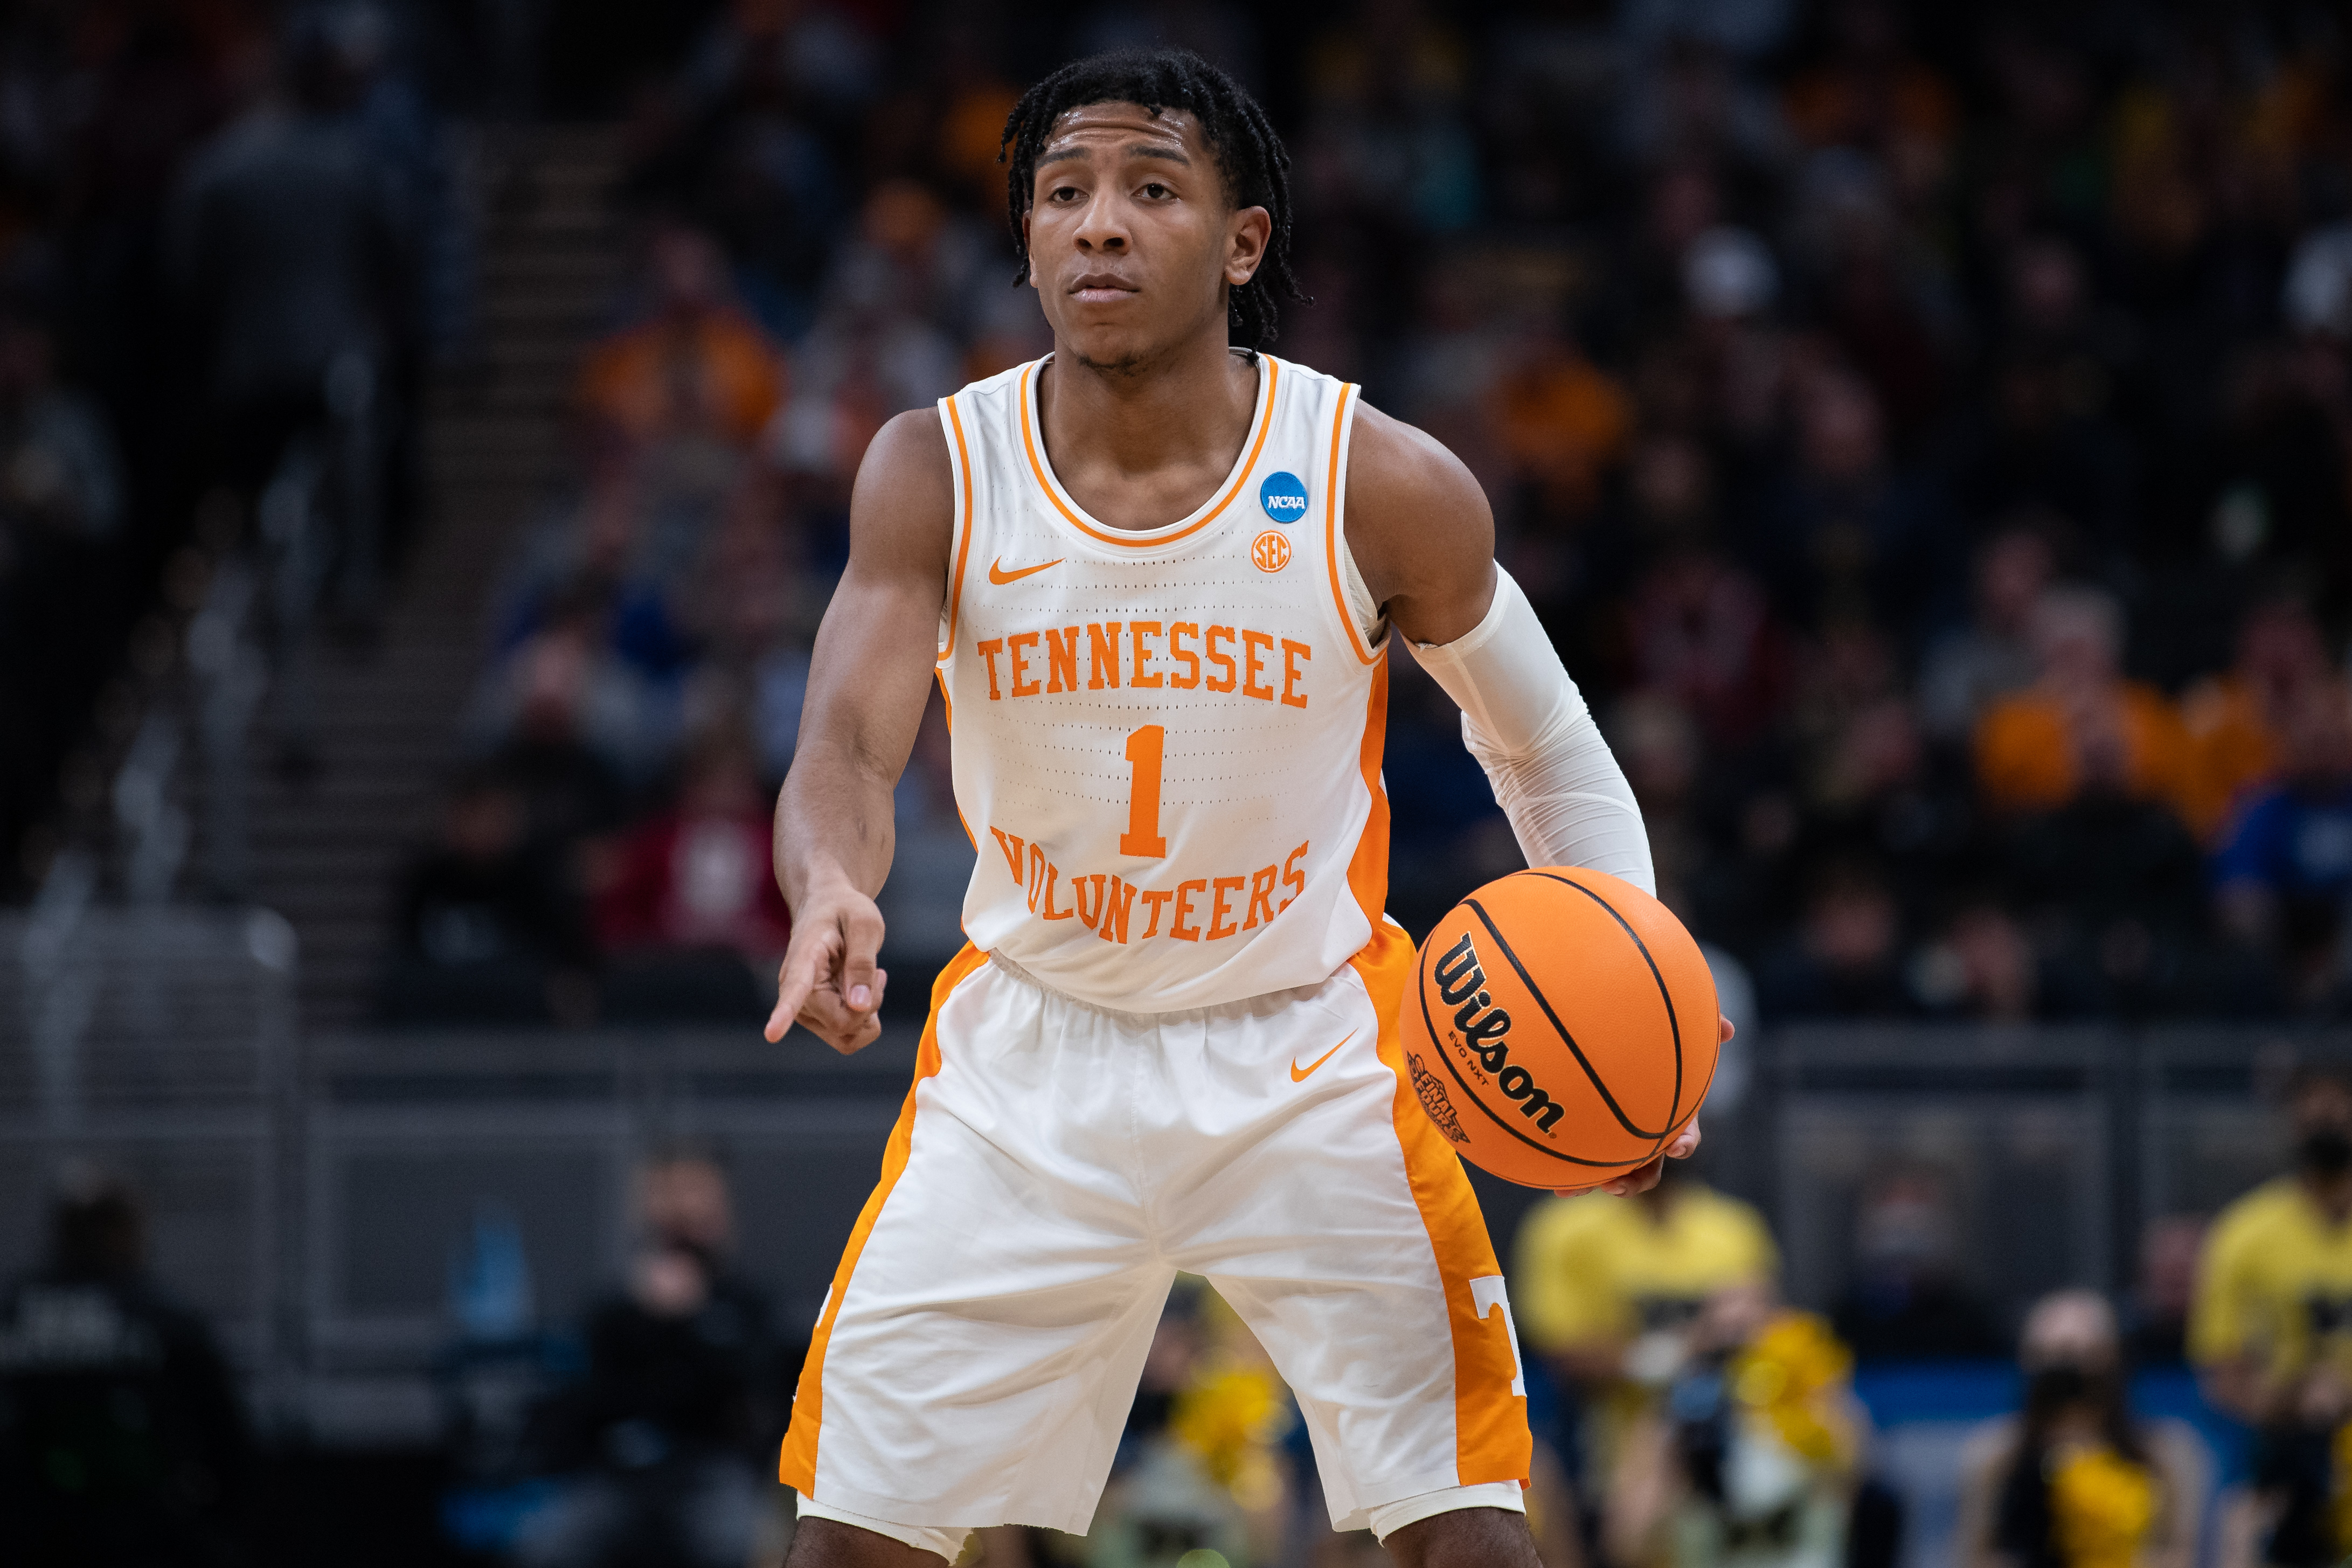 2022 NBA Dradt Profile: could Tennessee's Kennedy Chandler